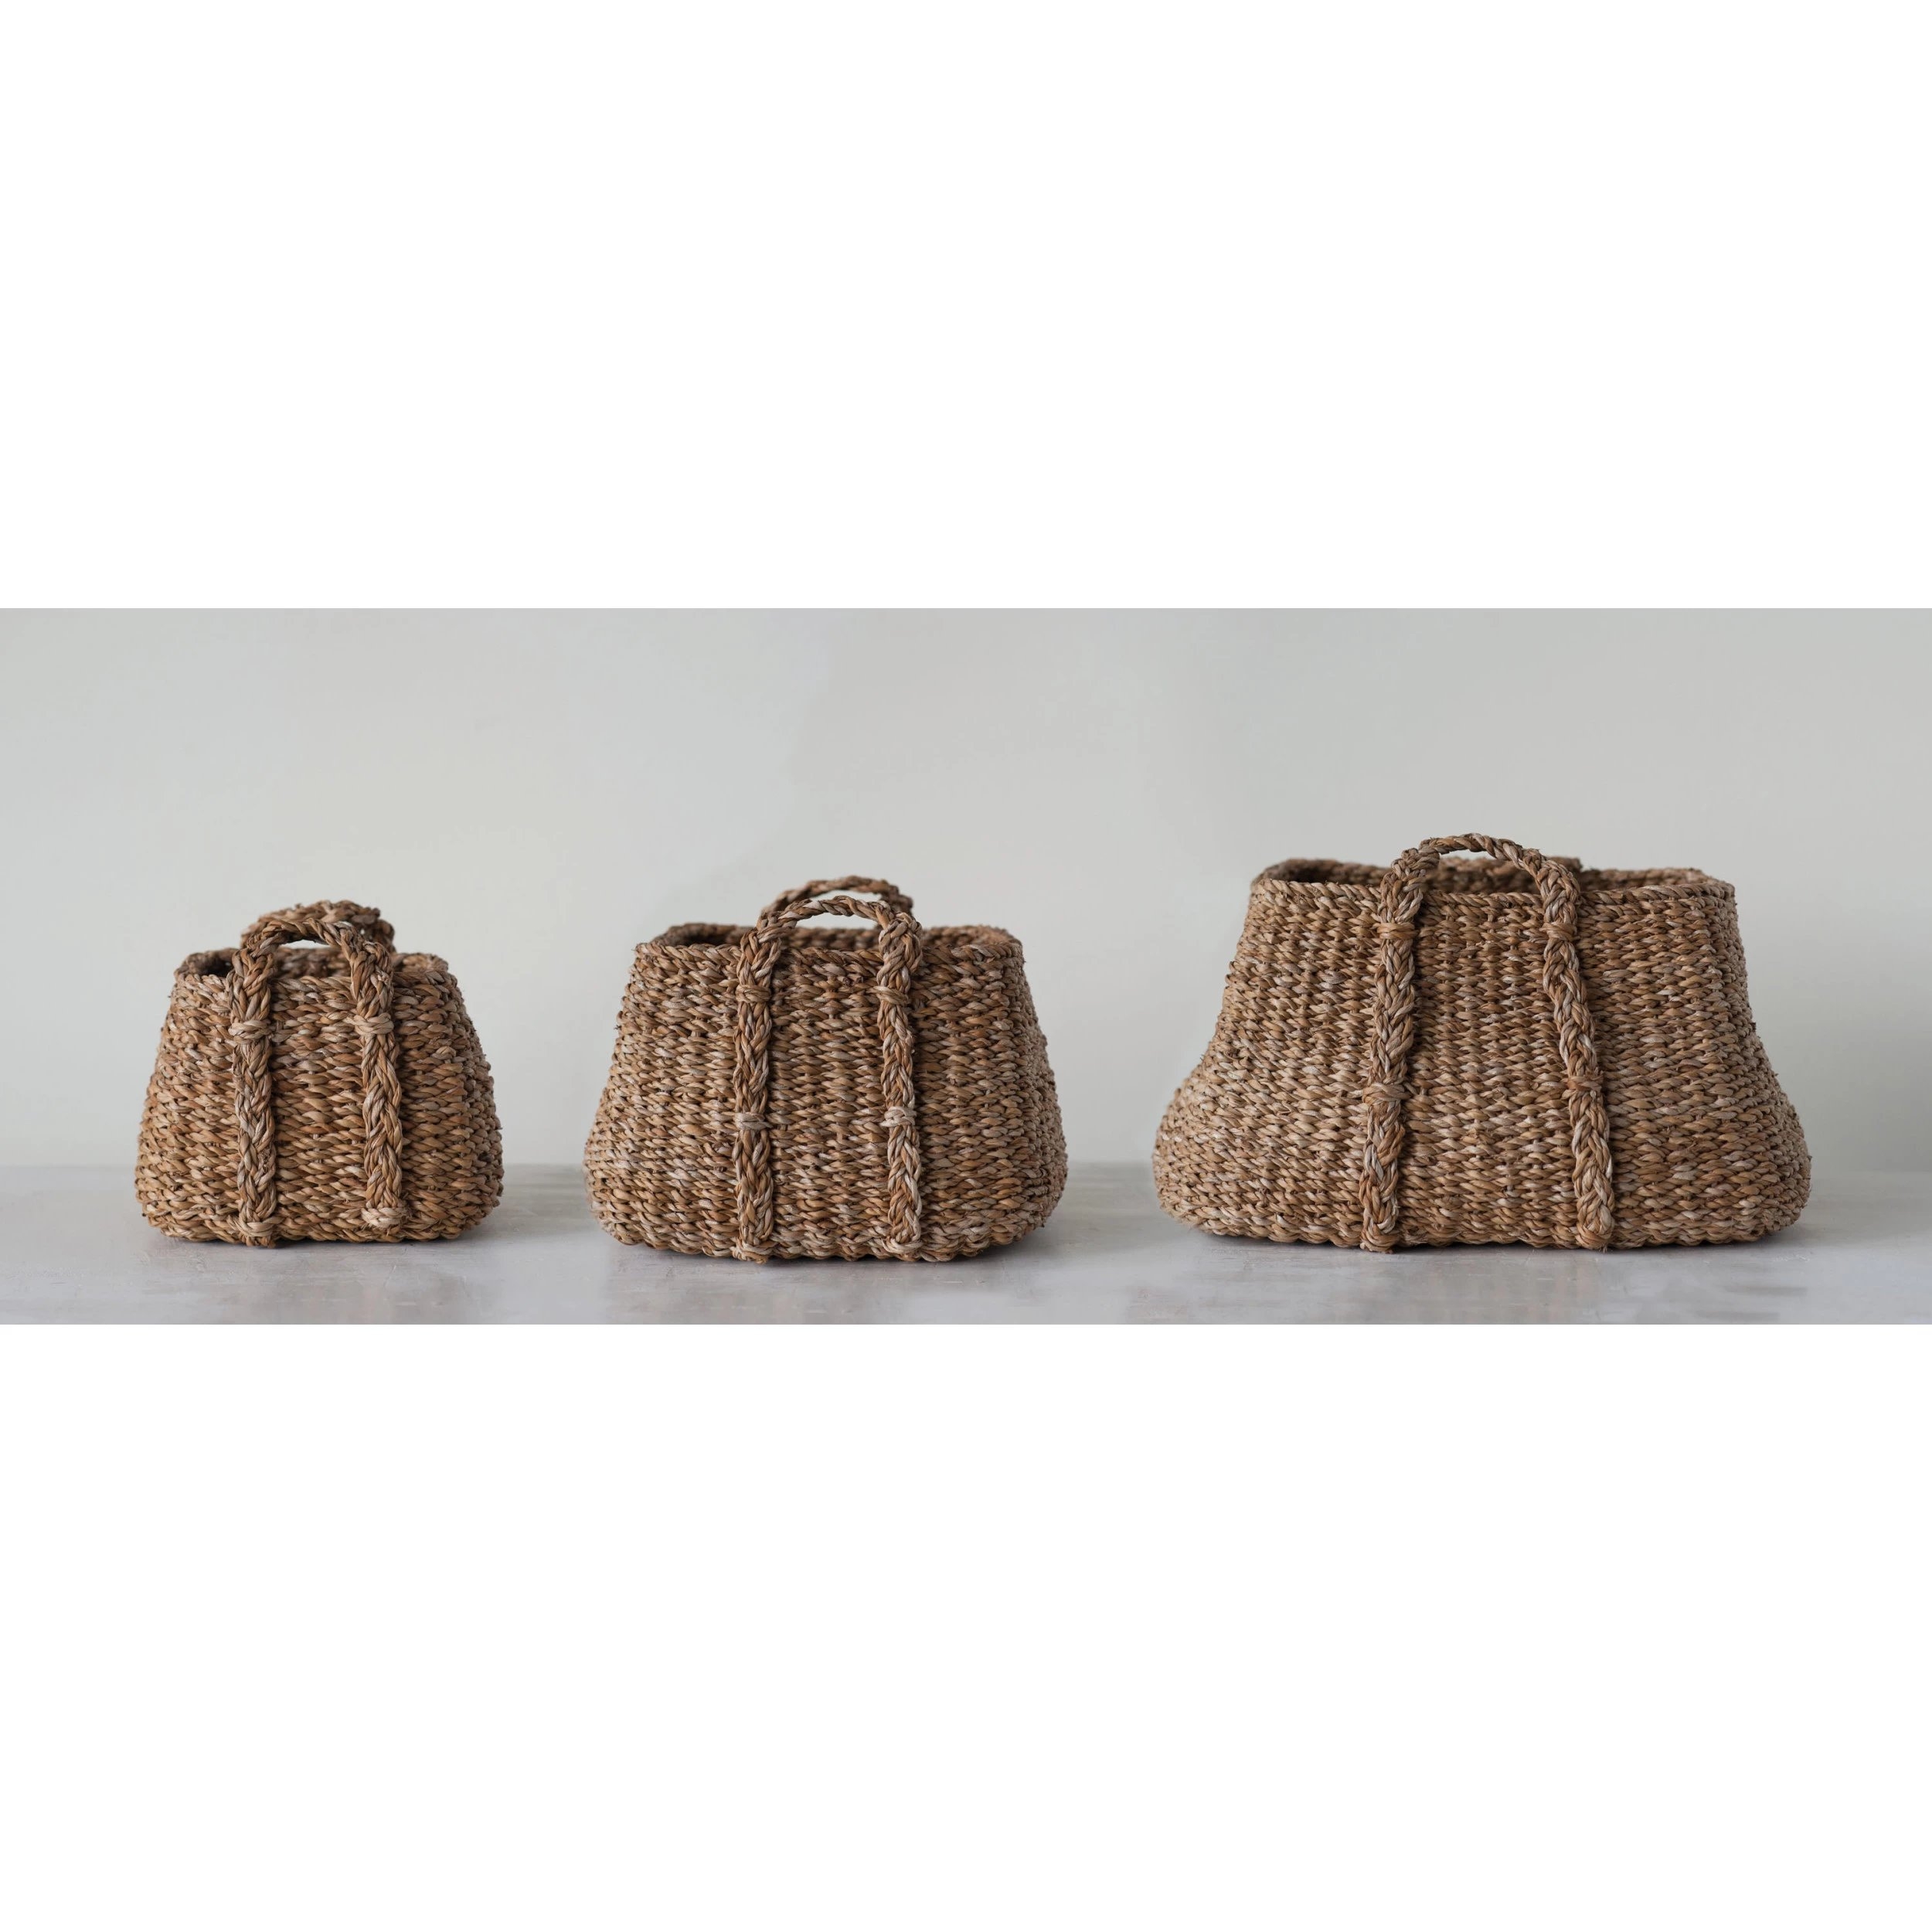 Brown Natural Seagrass Baskets with Handles (Set of 3 Sizes) - Image 2